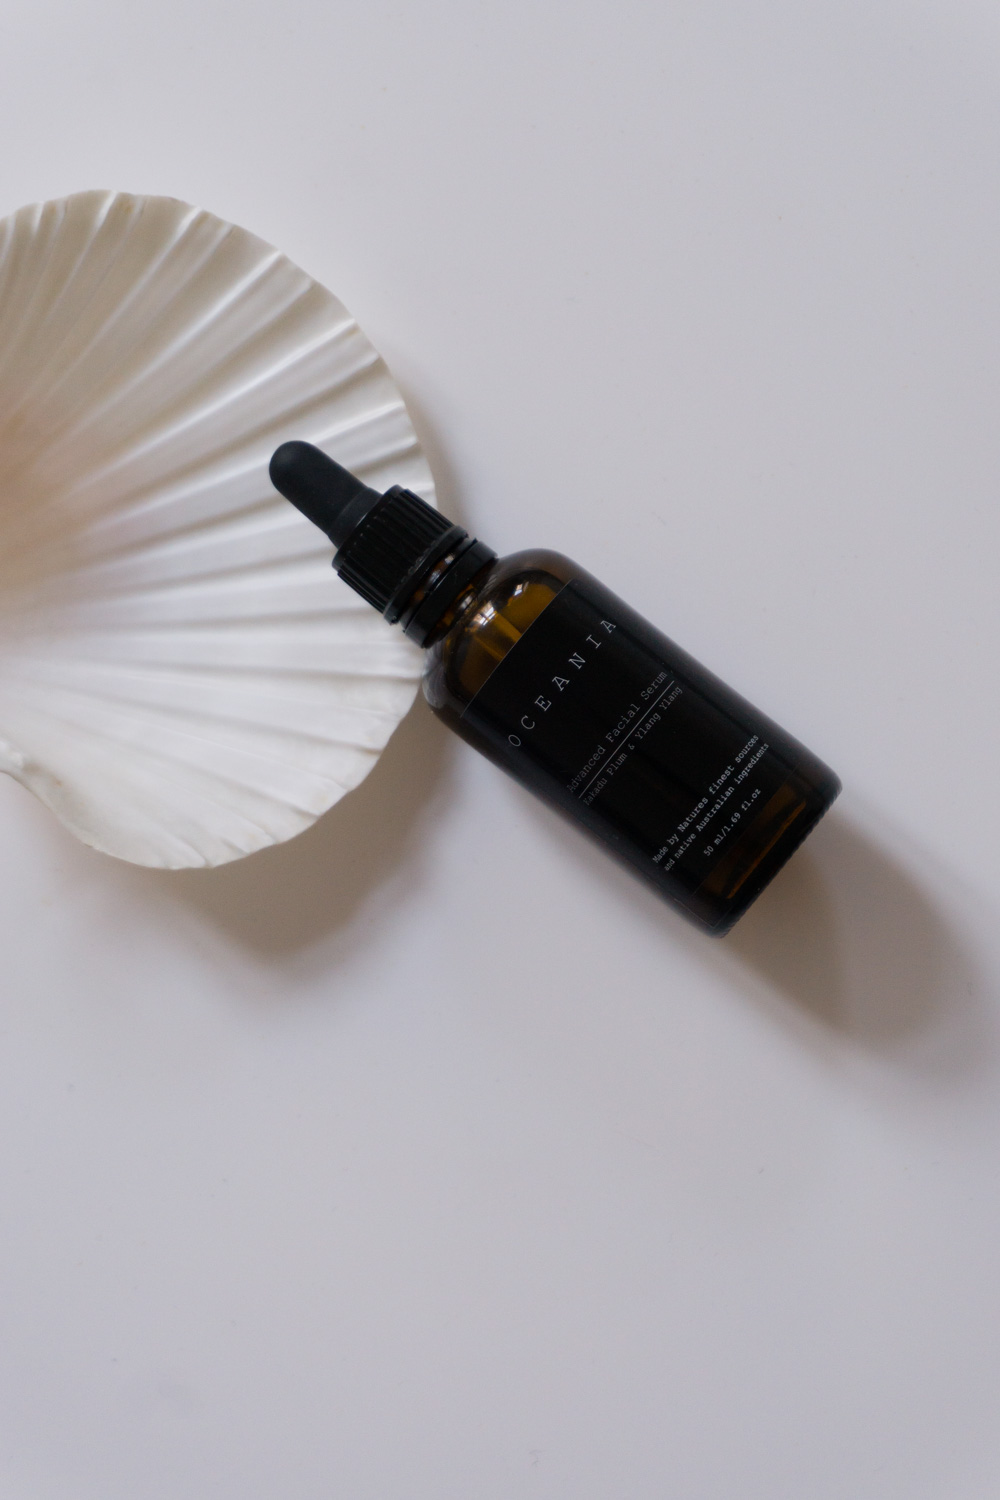 Oceania Skincare | Natural Minimalist Oil Skin Care, Made in Copenhagen | Beauty Product Photography | Slow Living, Self Care | RG Daily Blog